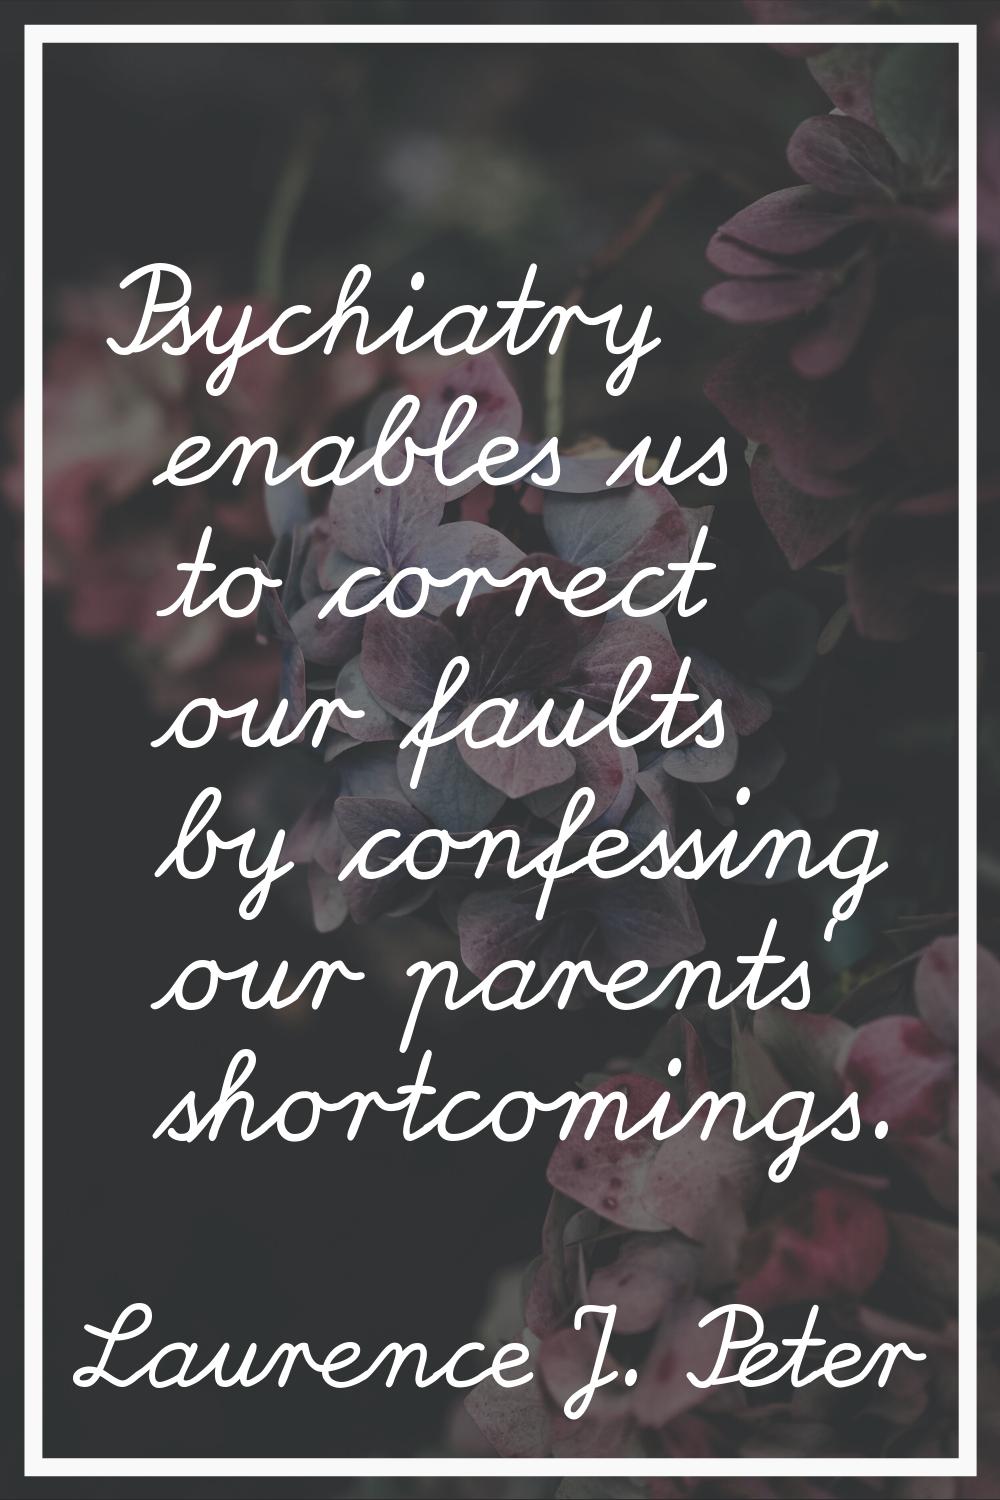 Psychiatry enables us to correct our faults by confessing our parents' shortcomings.